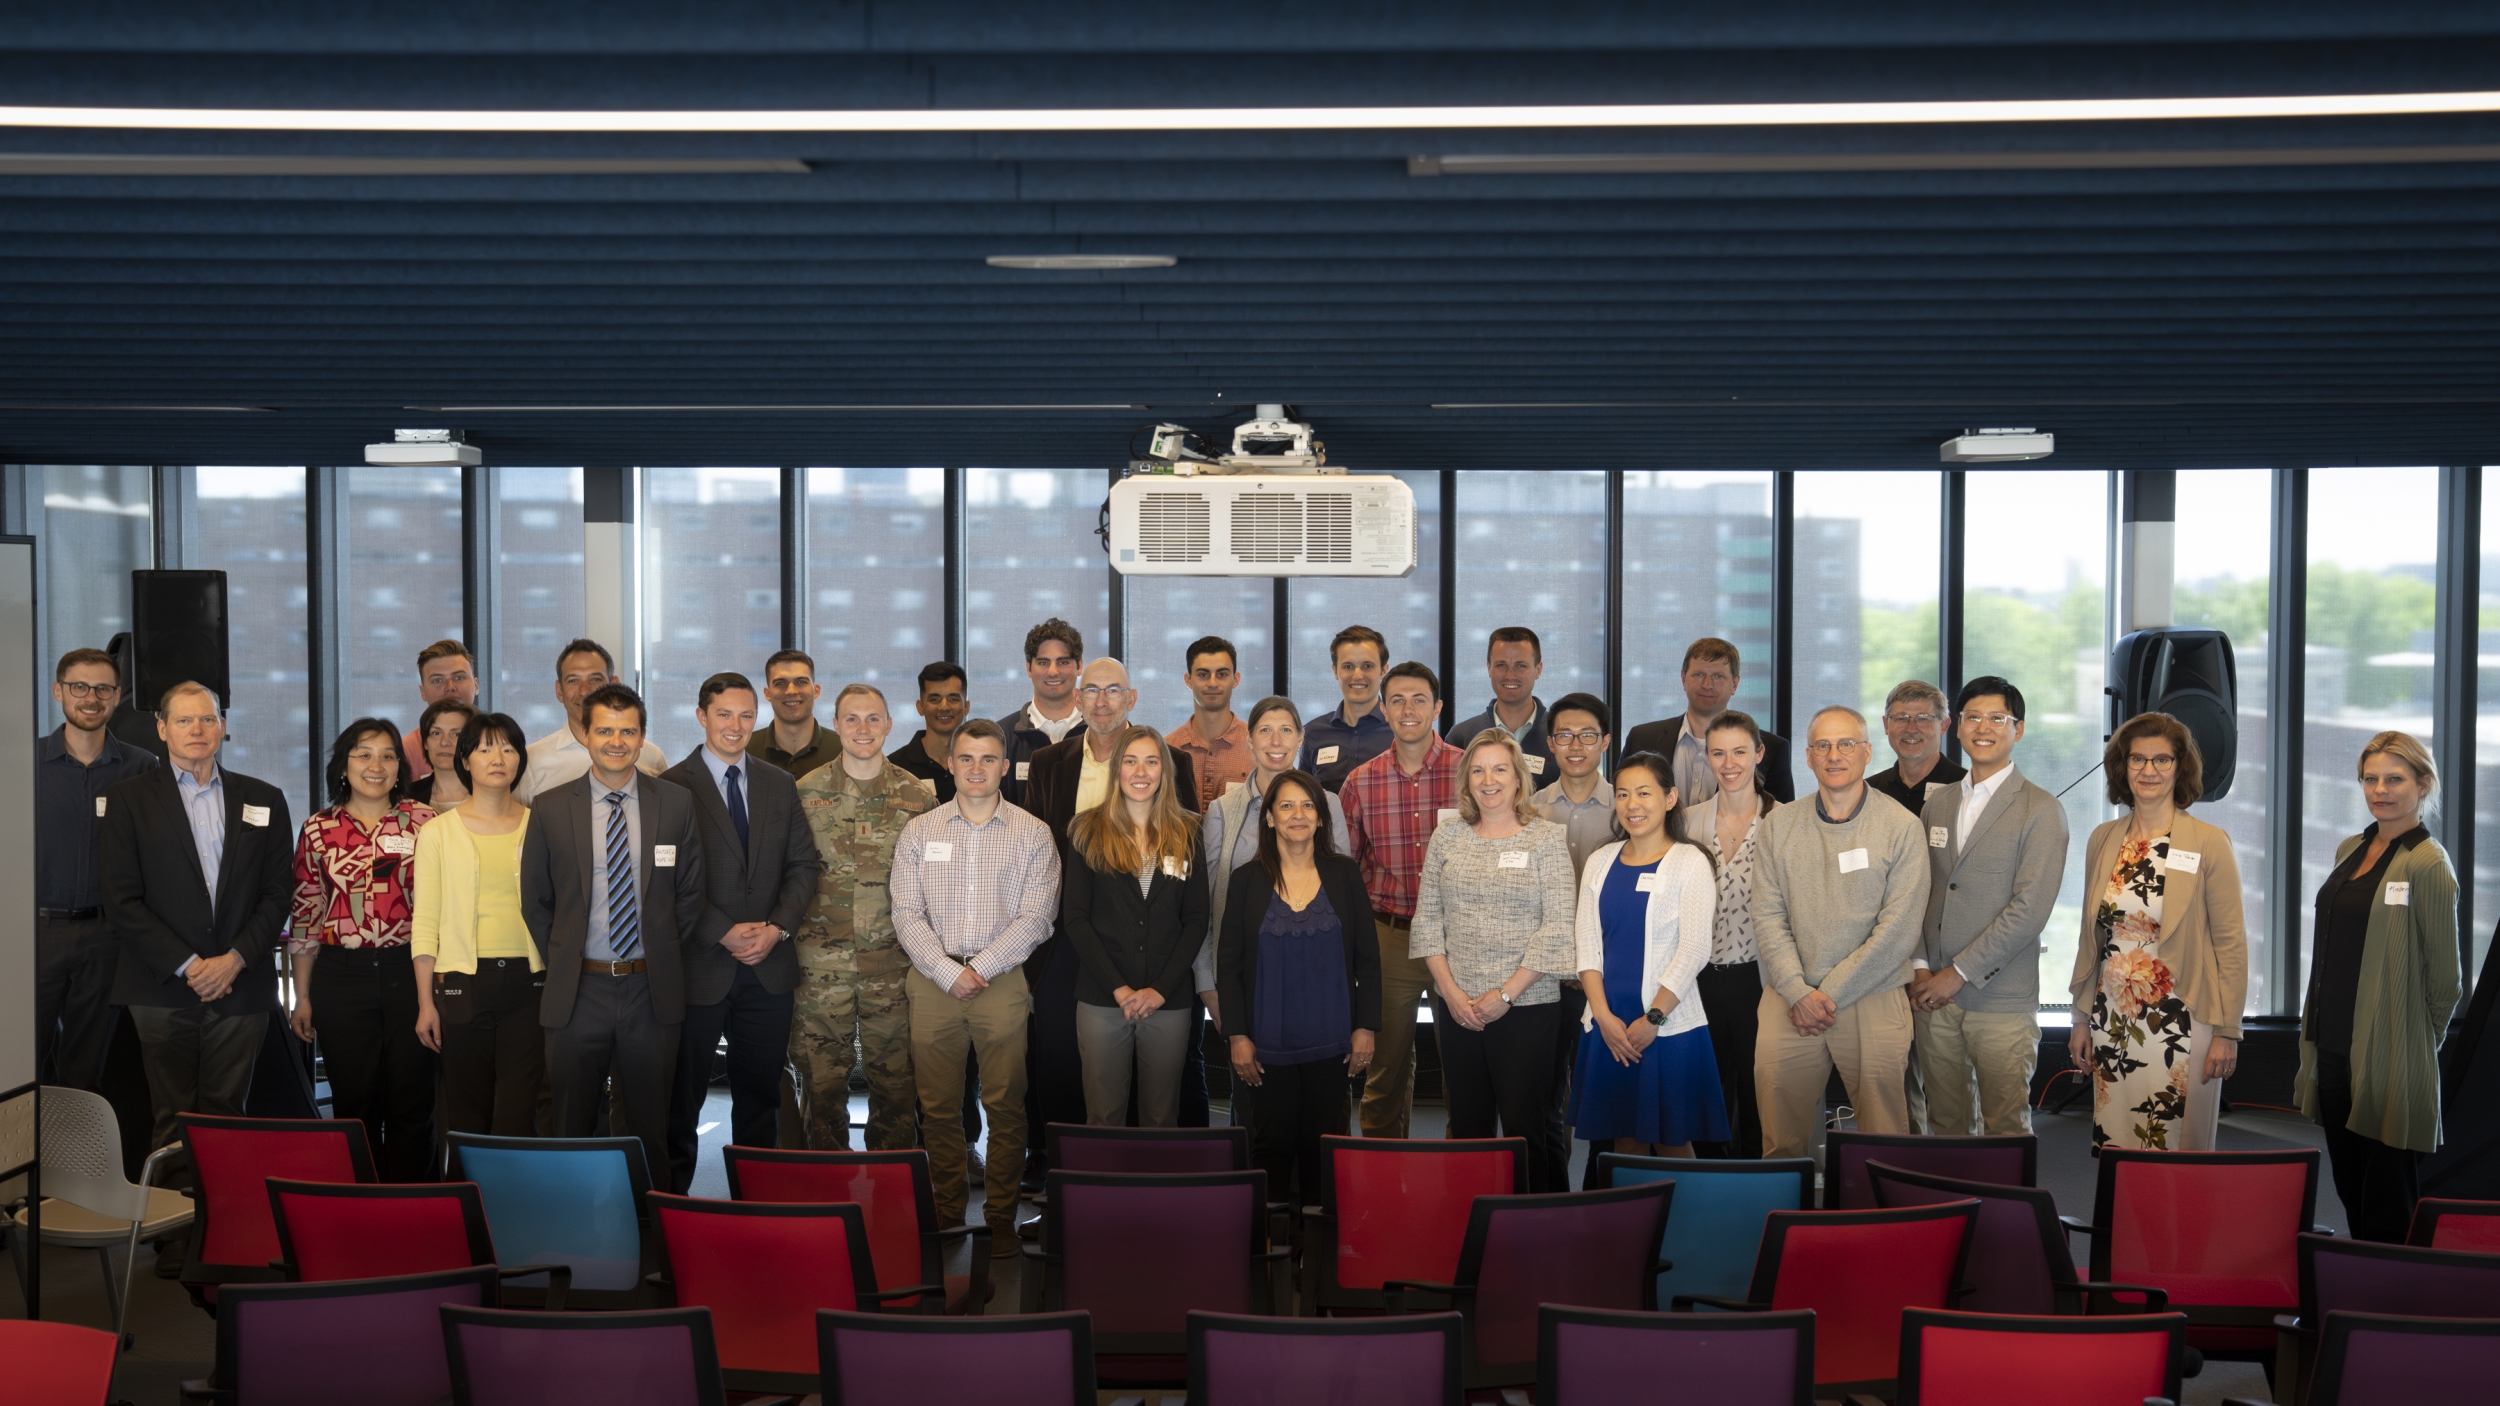 Lincoln Scholars, Military Fellows, and their mentors gather for a photo at a luncheon hosted by the Lincoln Laboratory – MIT Campus Interaction Committee to highlight collaborative research.